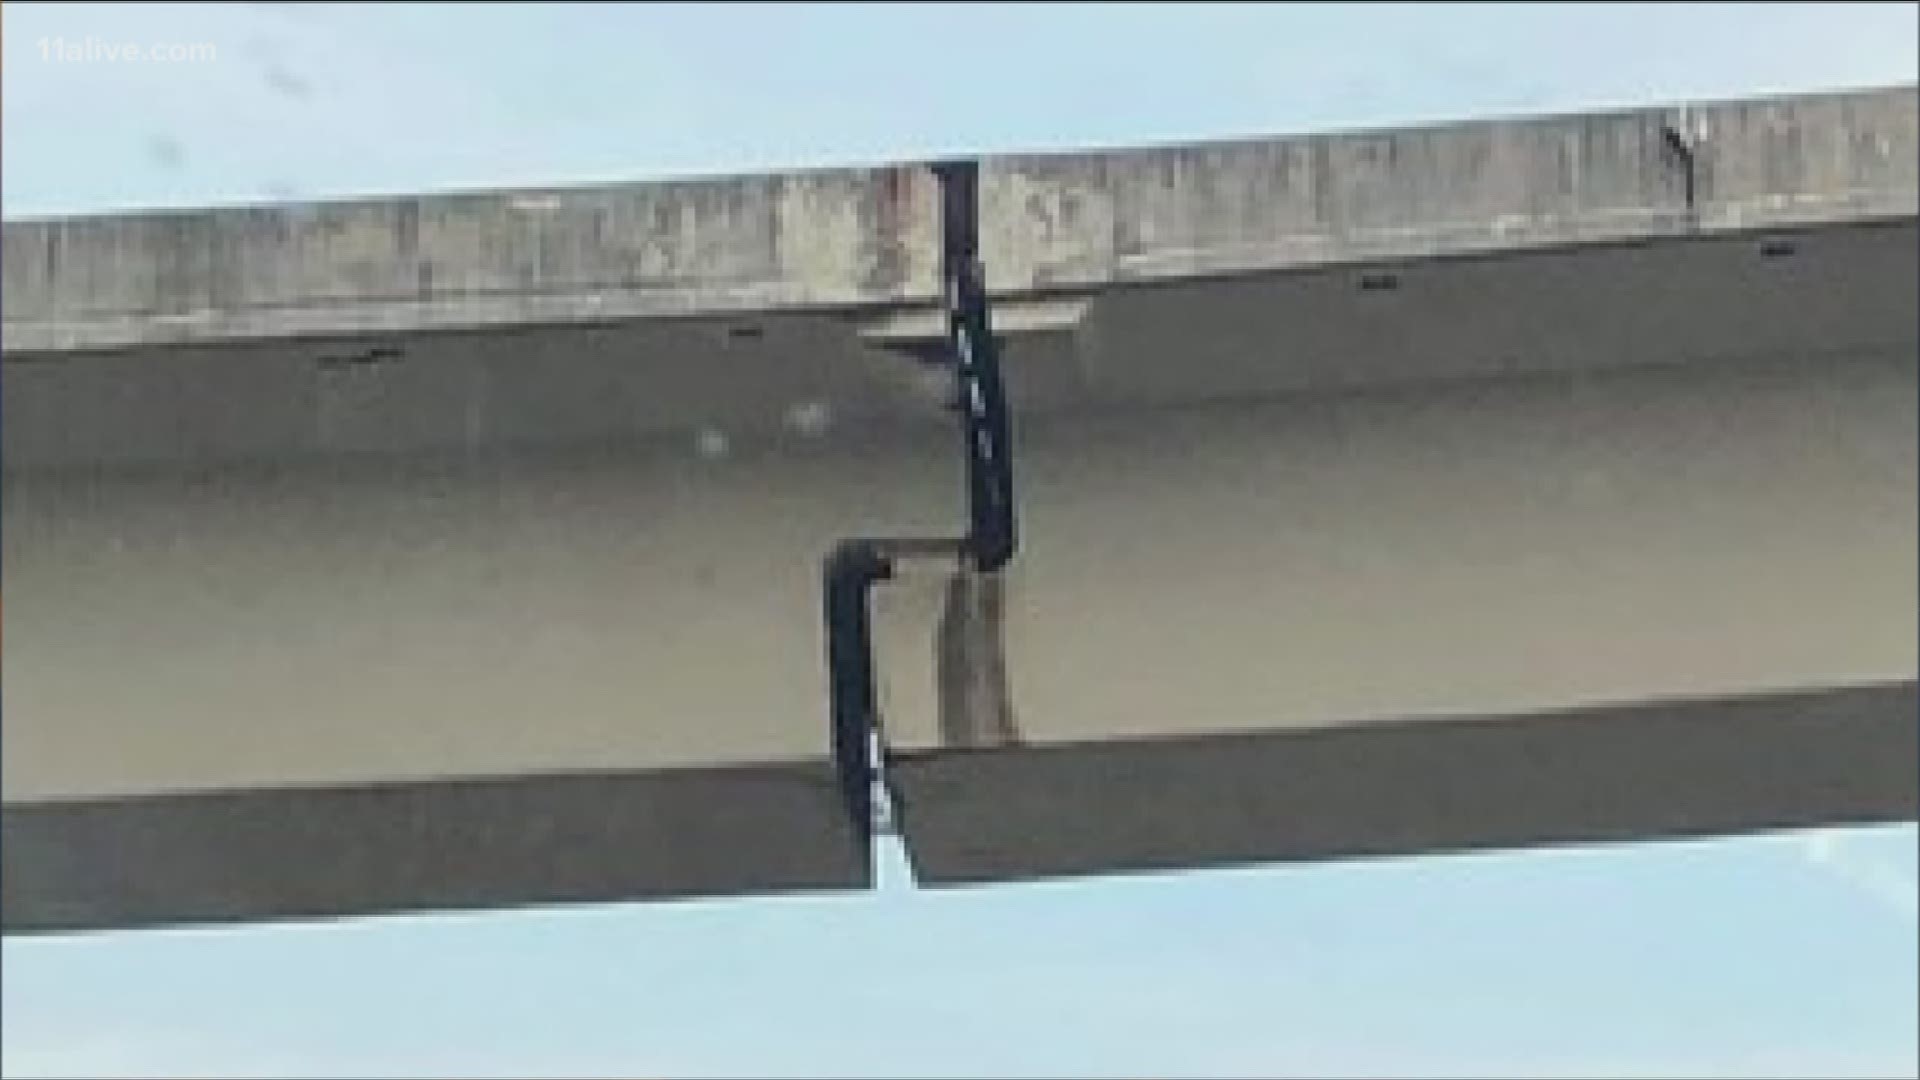 GDOT said the image is actually an expansion joint and it's safe to drive on.